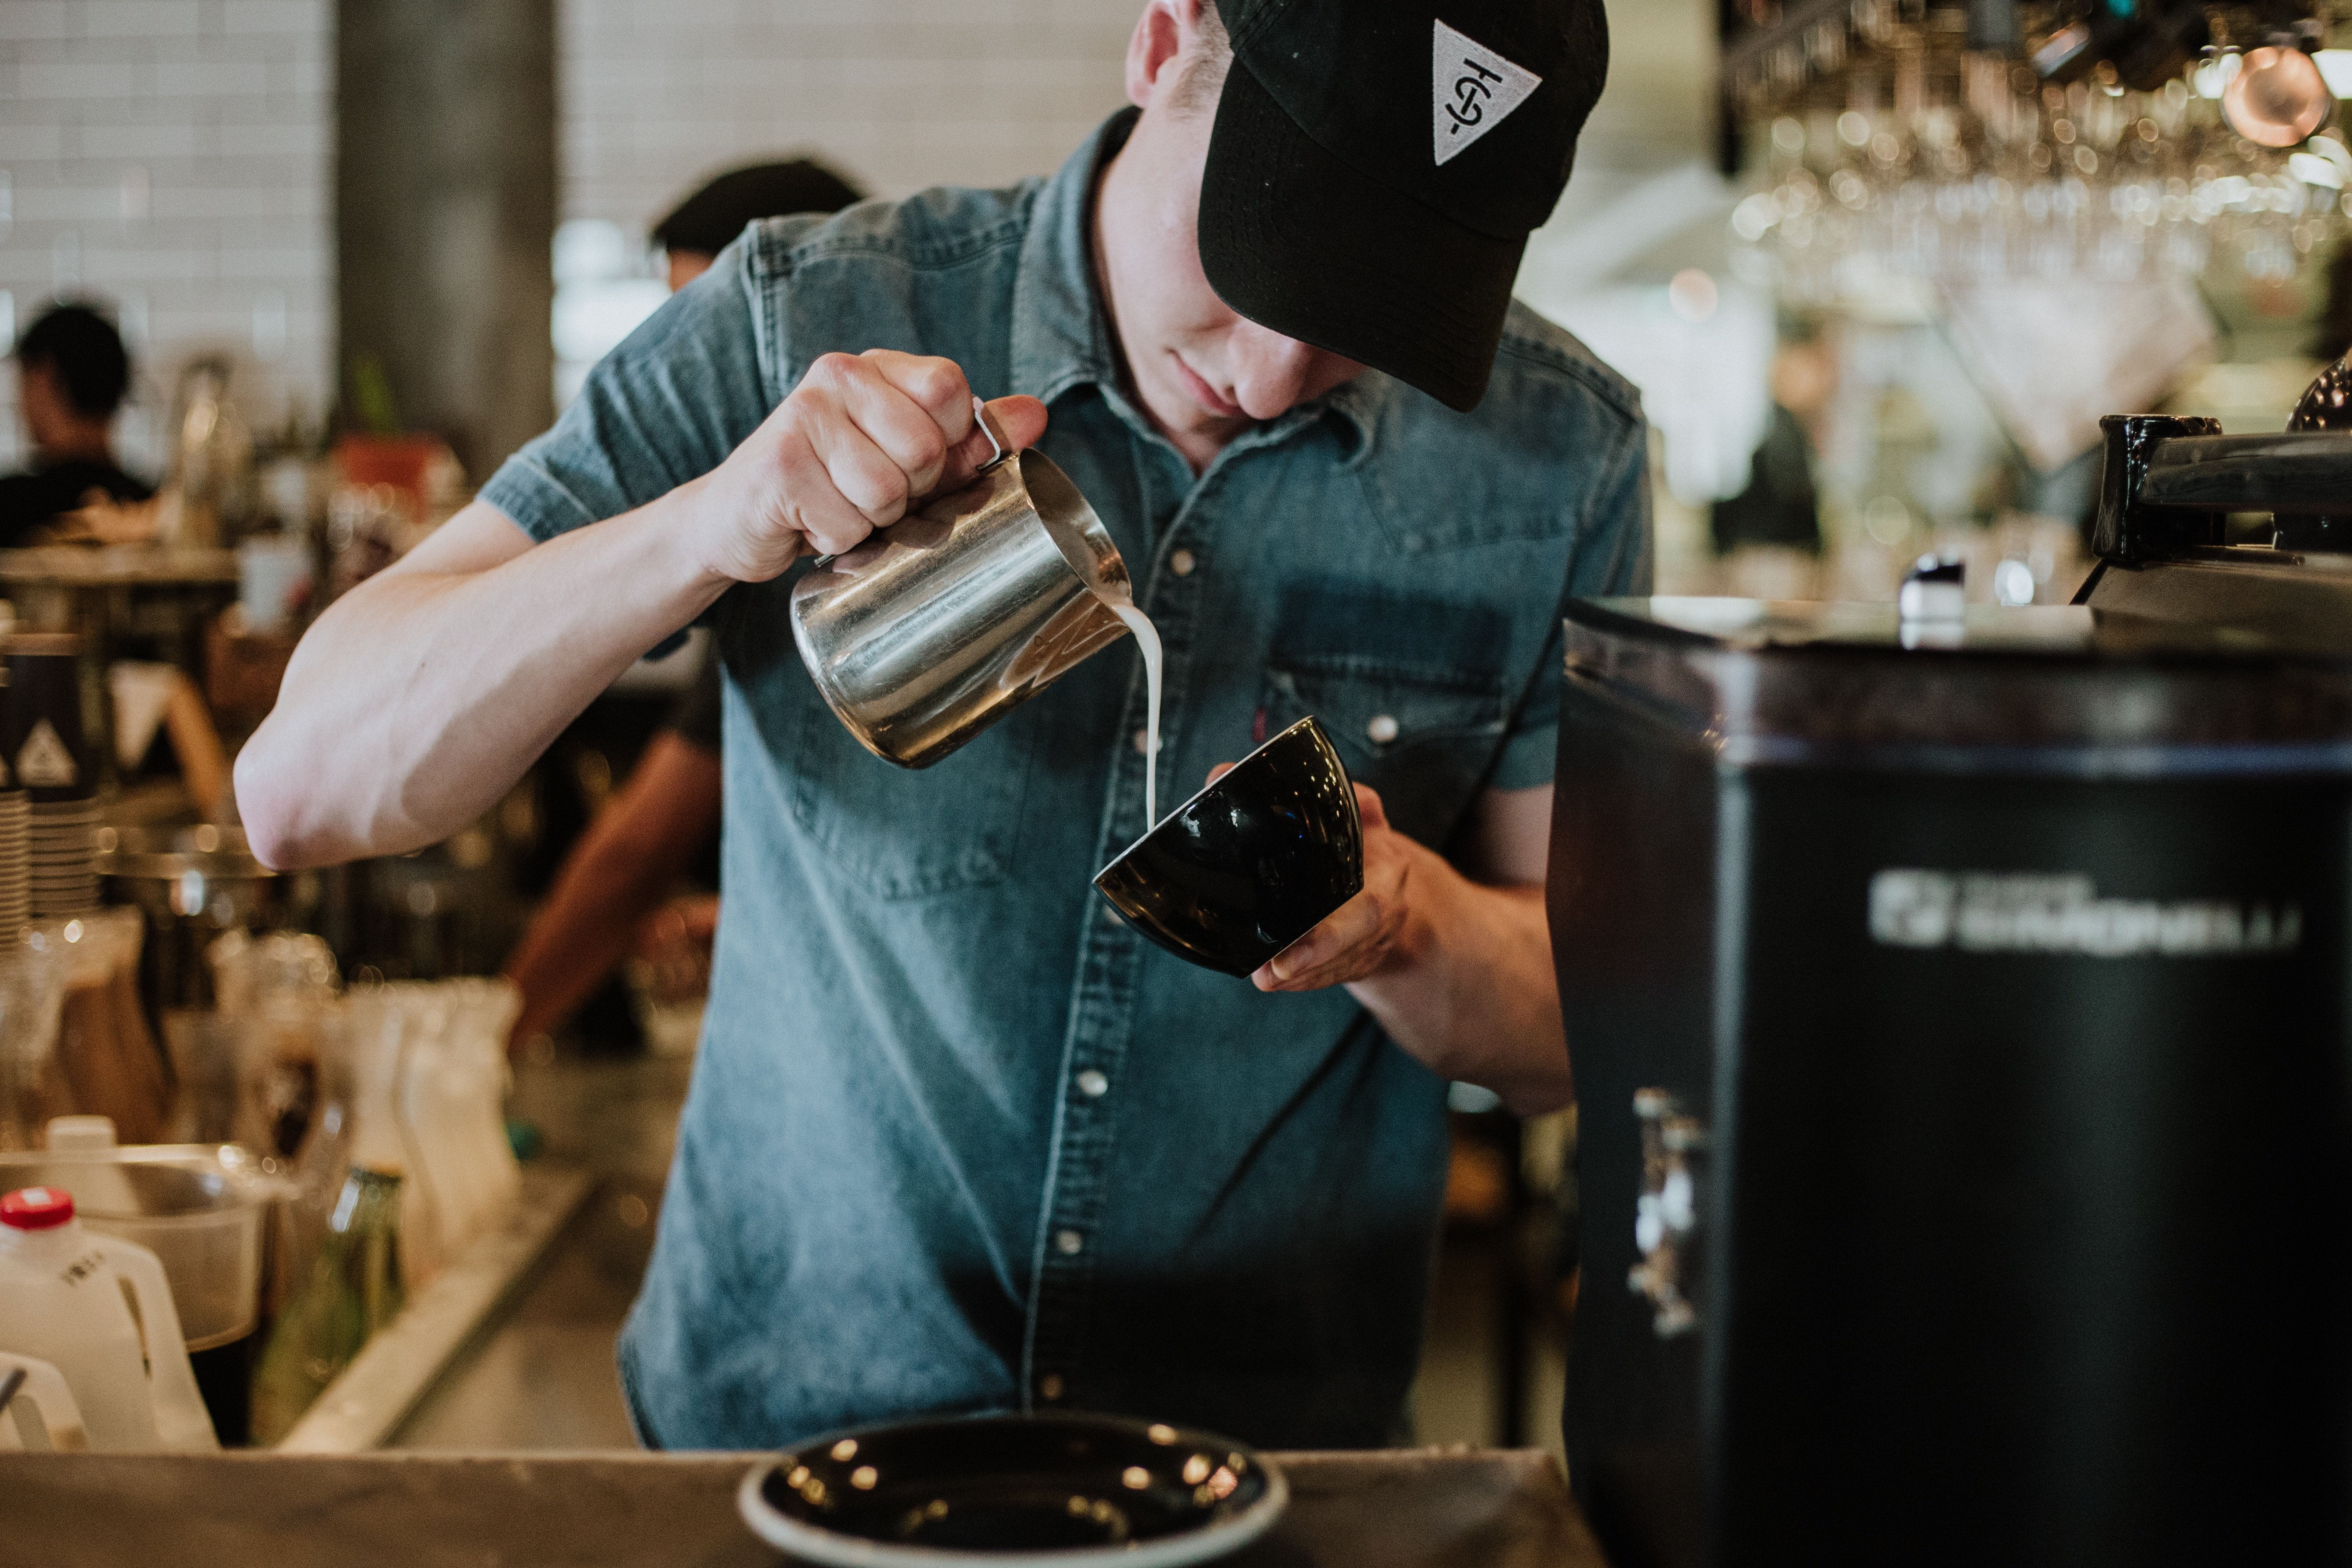 Mobile: Opportunity or Threat for Indie Coffee?